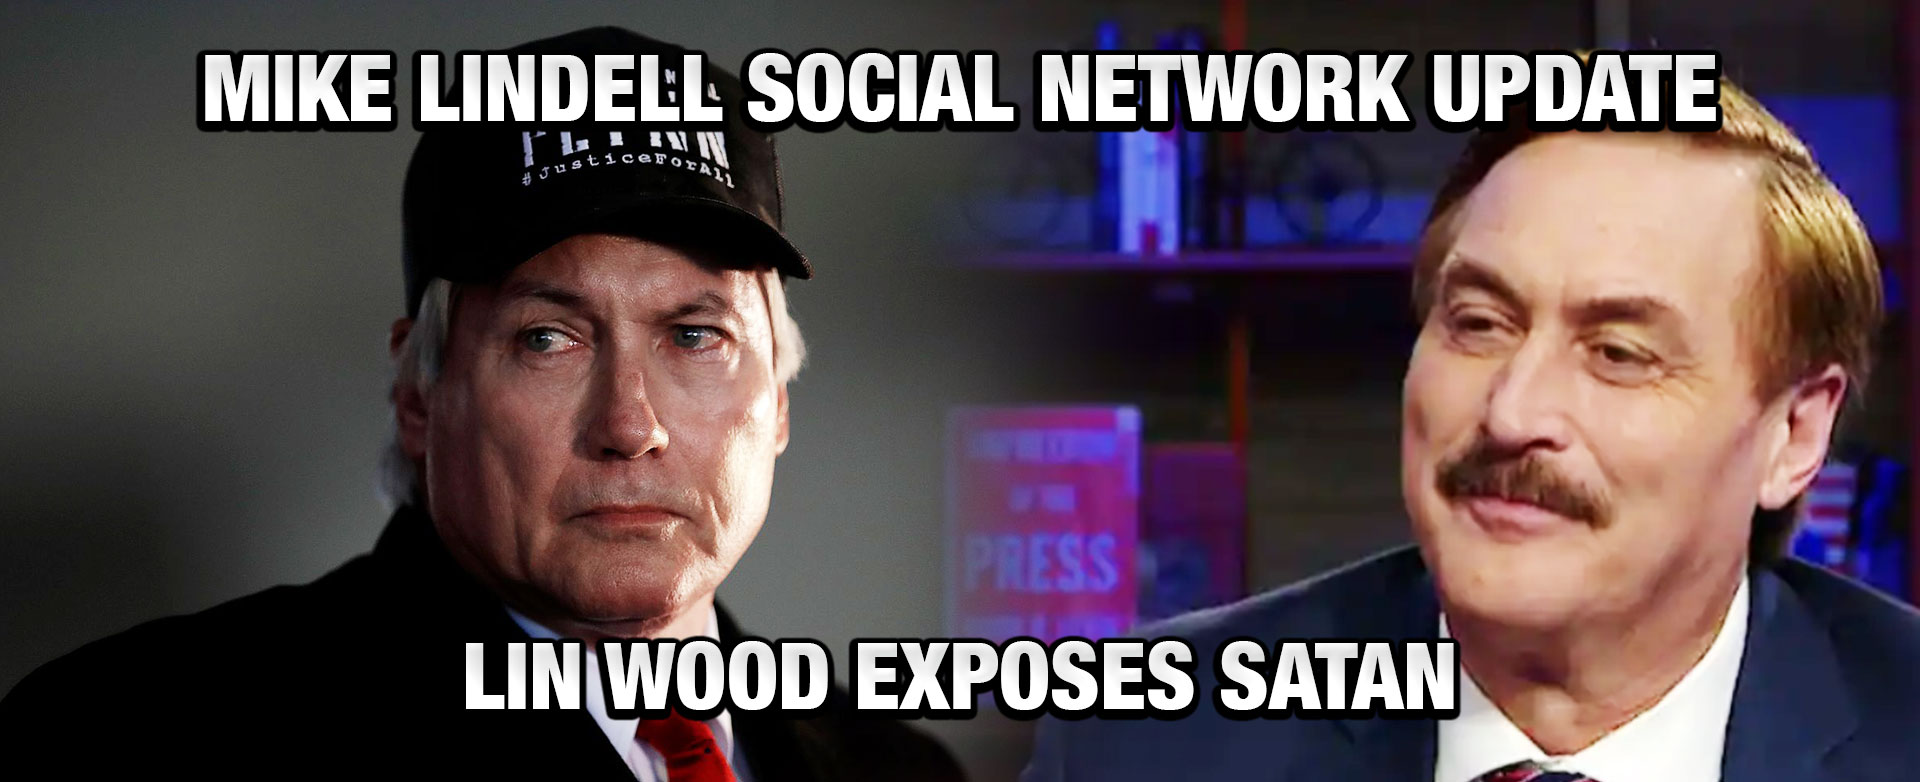 MyPatriotsNetwork-Mike Lindell Social Network Update, Lin Wood Exposes Satan & Much More! March 30 2021 Update